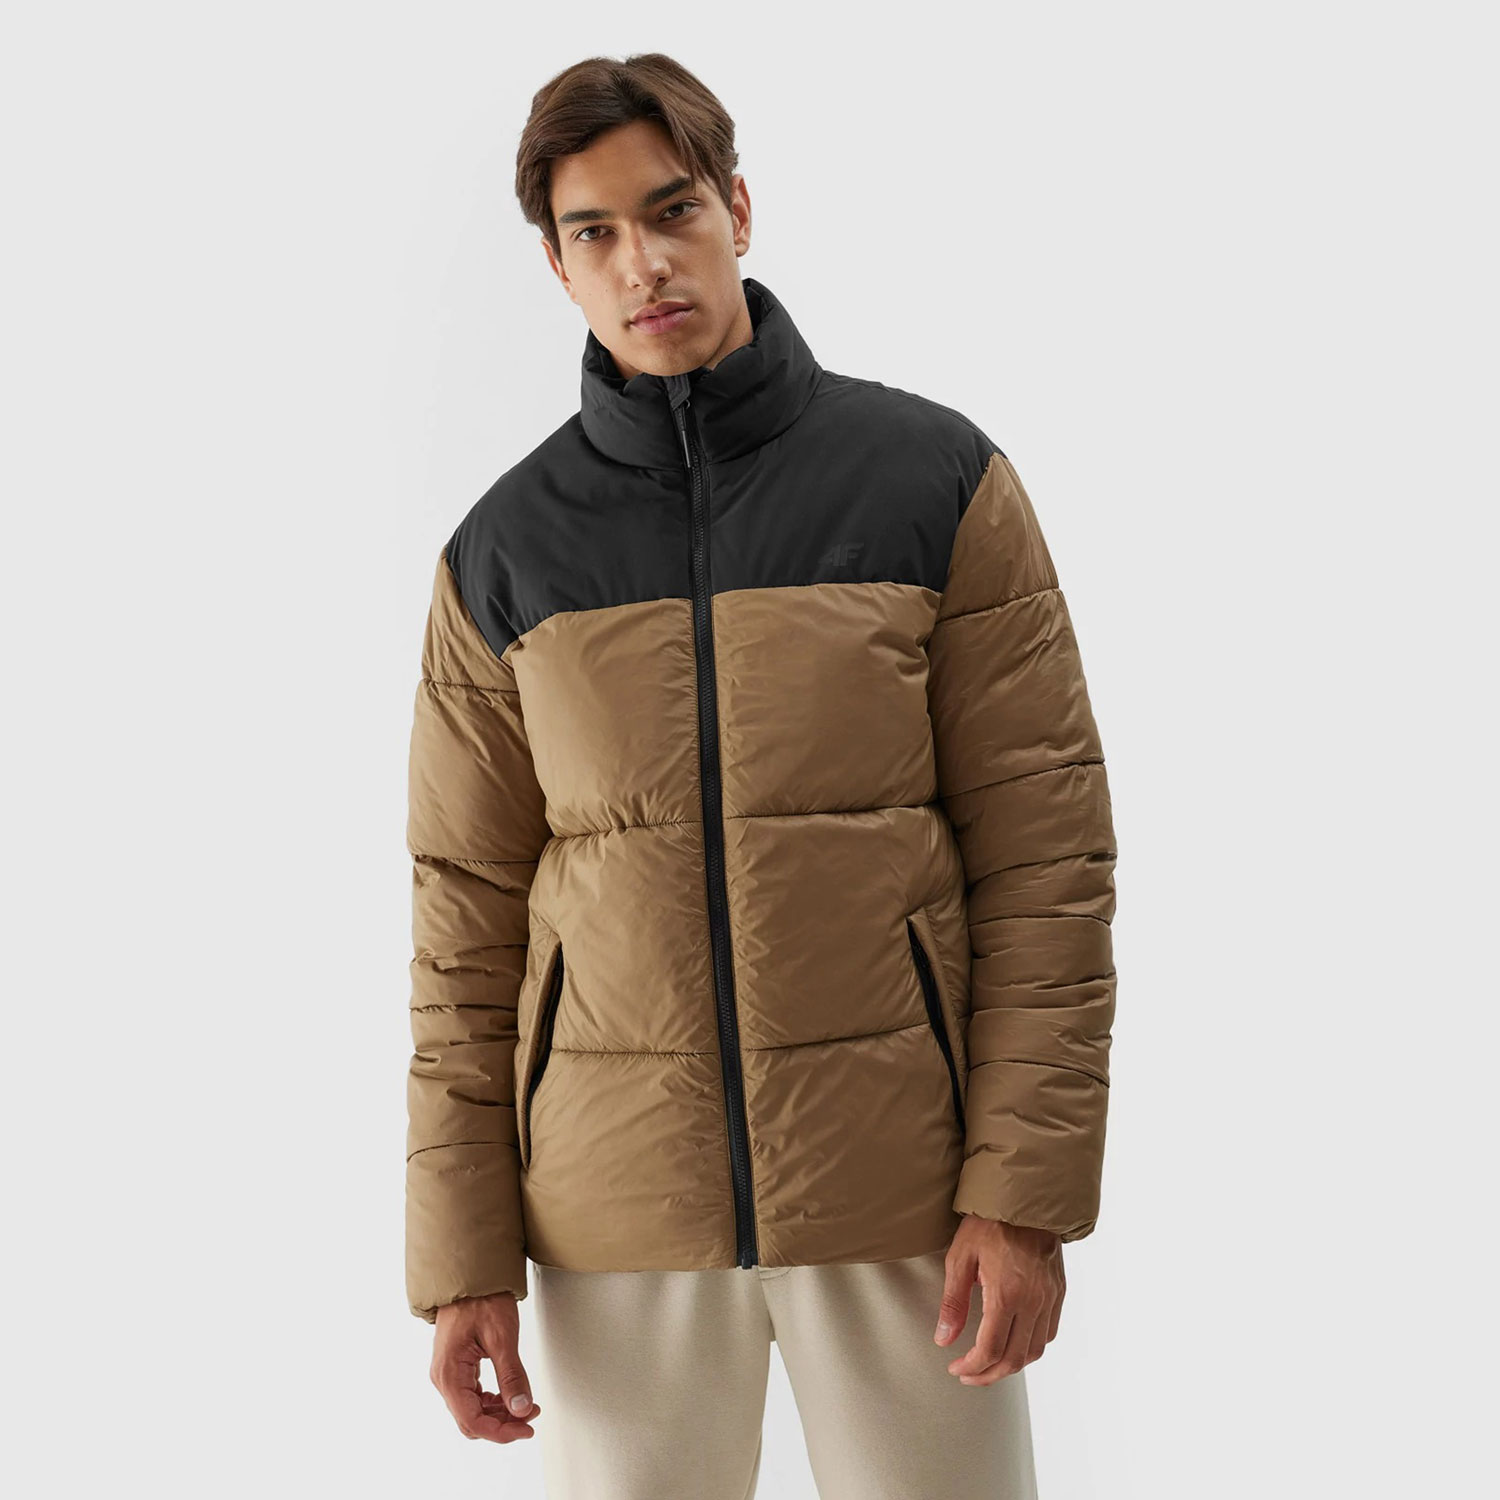 4F MEN'S SYNTHETIC-FILL DOWN JACKET ΚΑΦΕ